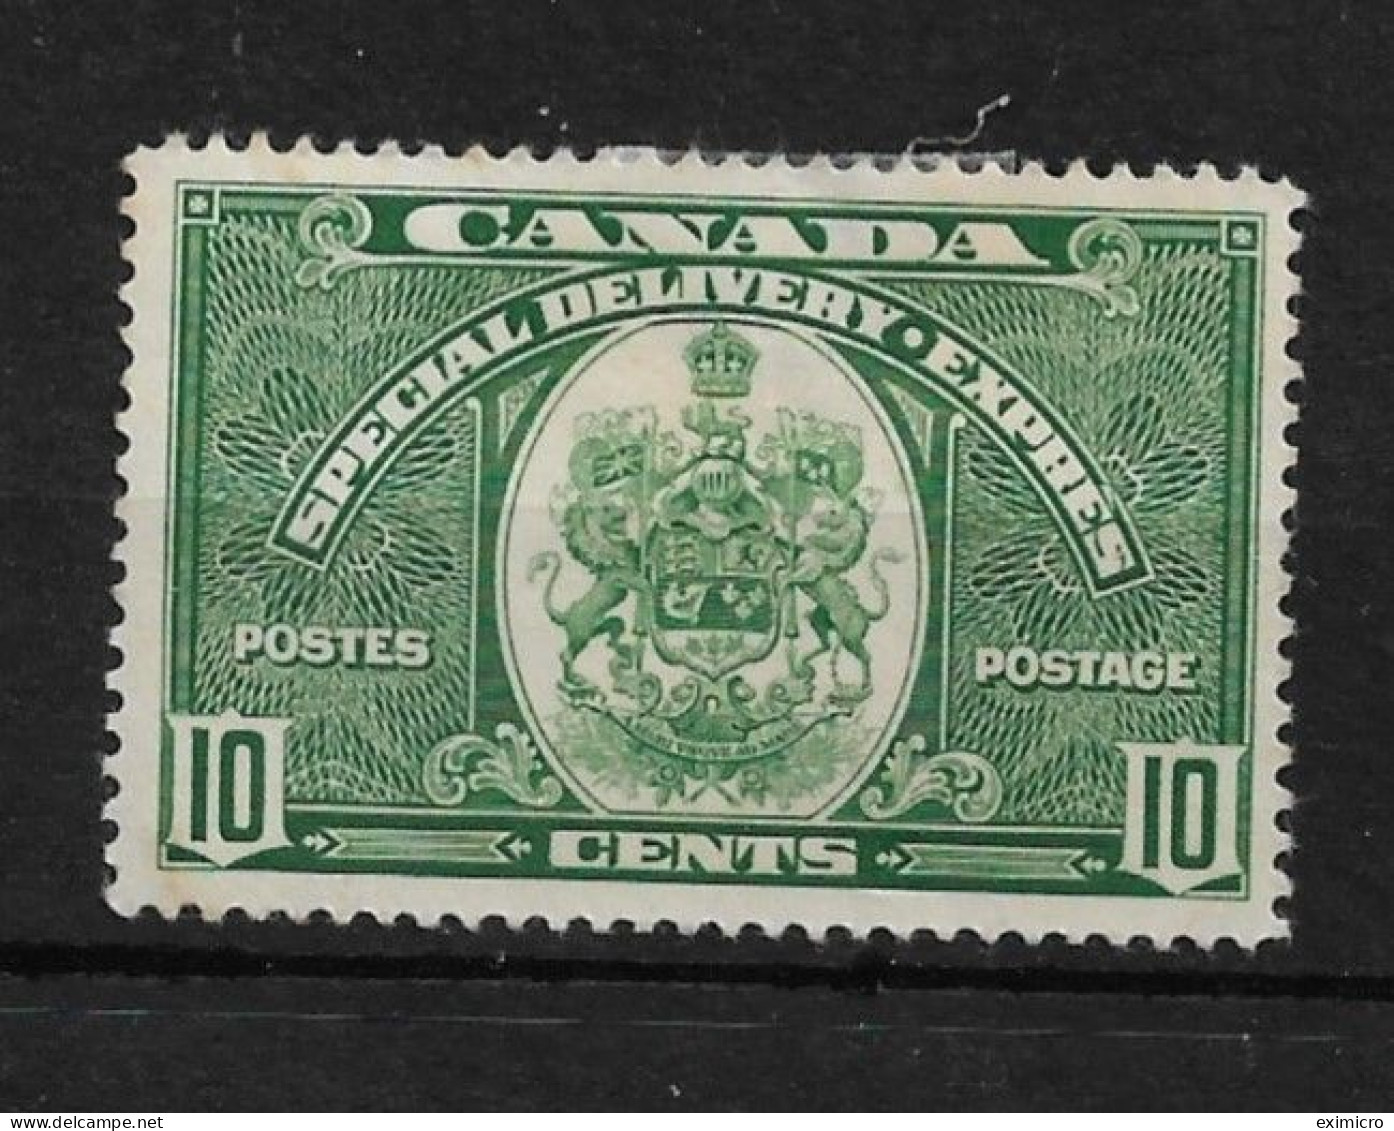 CANADA 1939 10c SPECIAL DELIVERY SG S9 MOUNTED MINT Cat £24 - Special Delivery